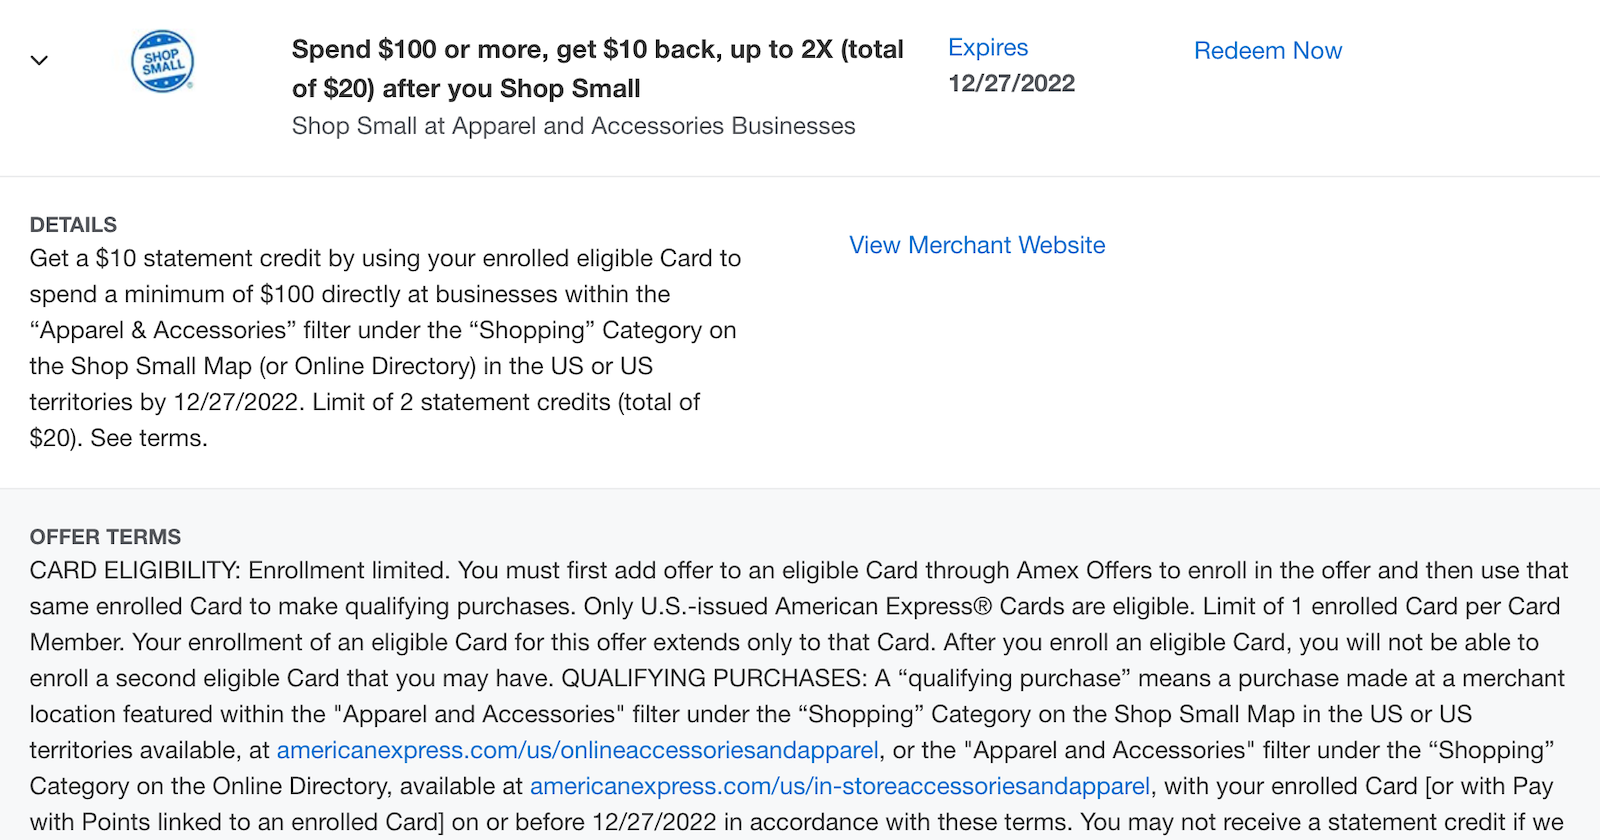 a rebate offer from American Express when shopping at small businesses